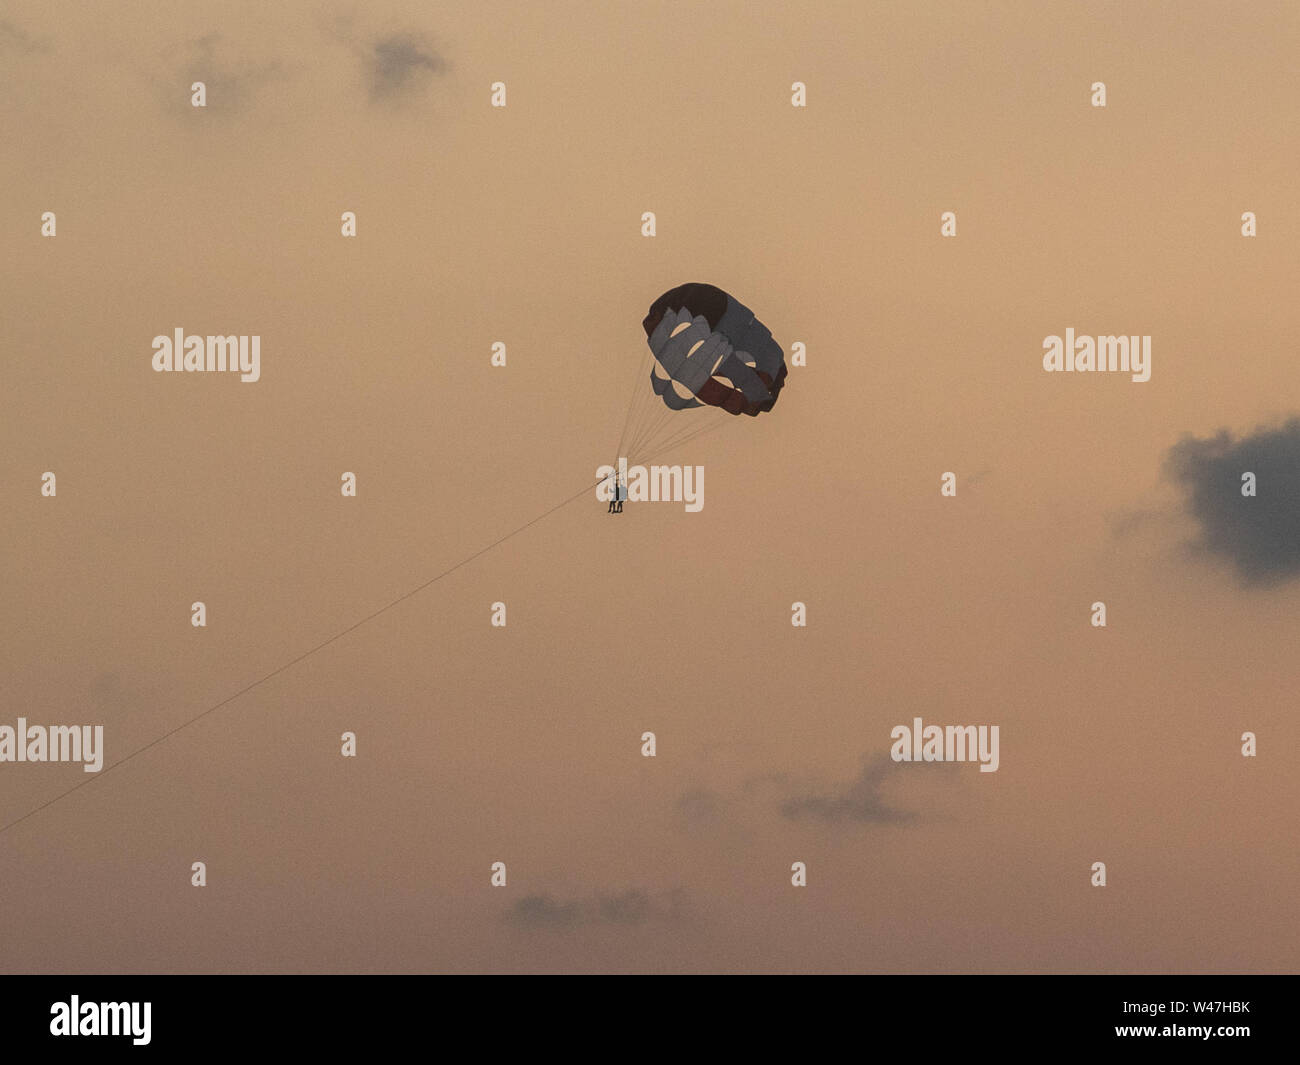 Beirut, Lebanon. 20th July, 2019. People seen paragliding in a parachute at sunset in Beirut. Credit: Amer Ghazzal/SOPA Images/ZUMA Wire/Alamy Live News Stock Photo